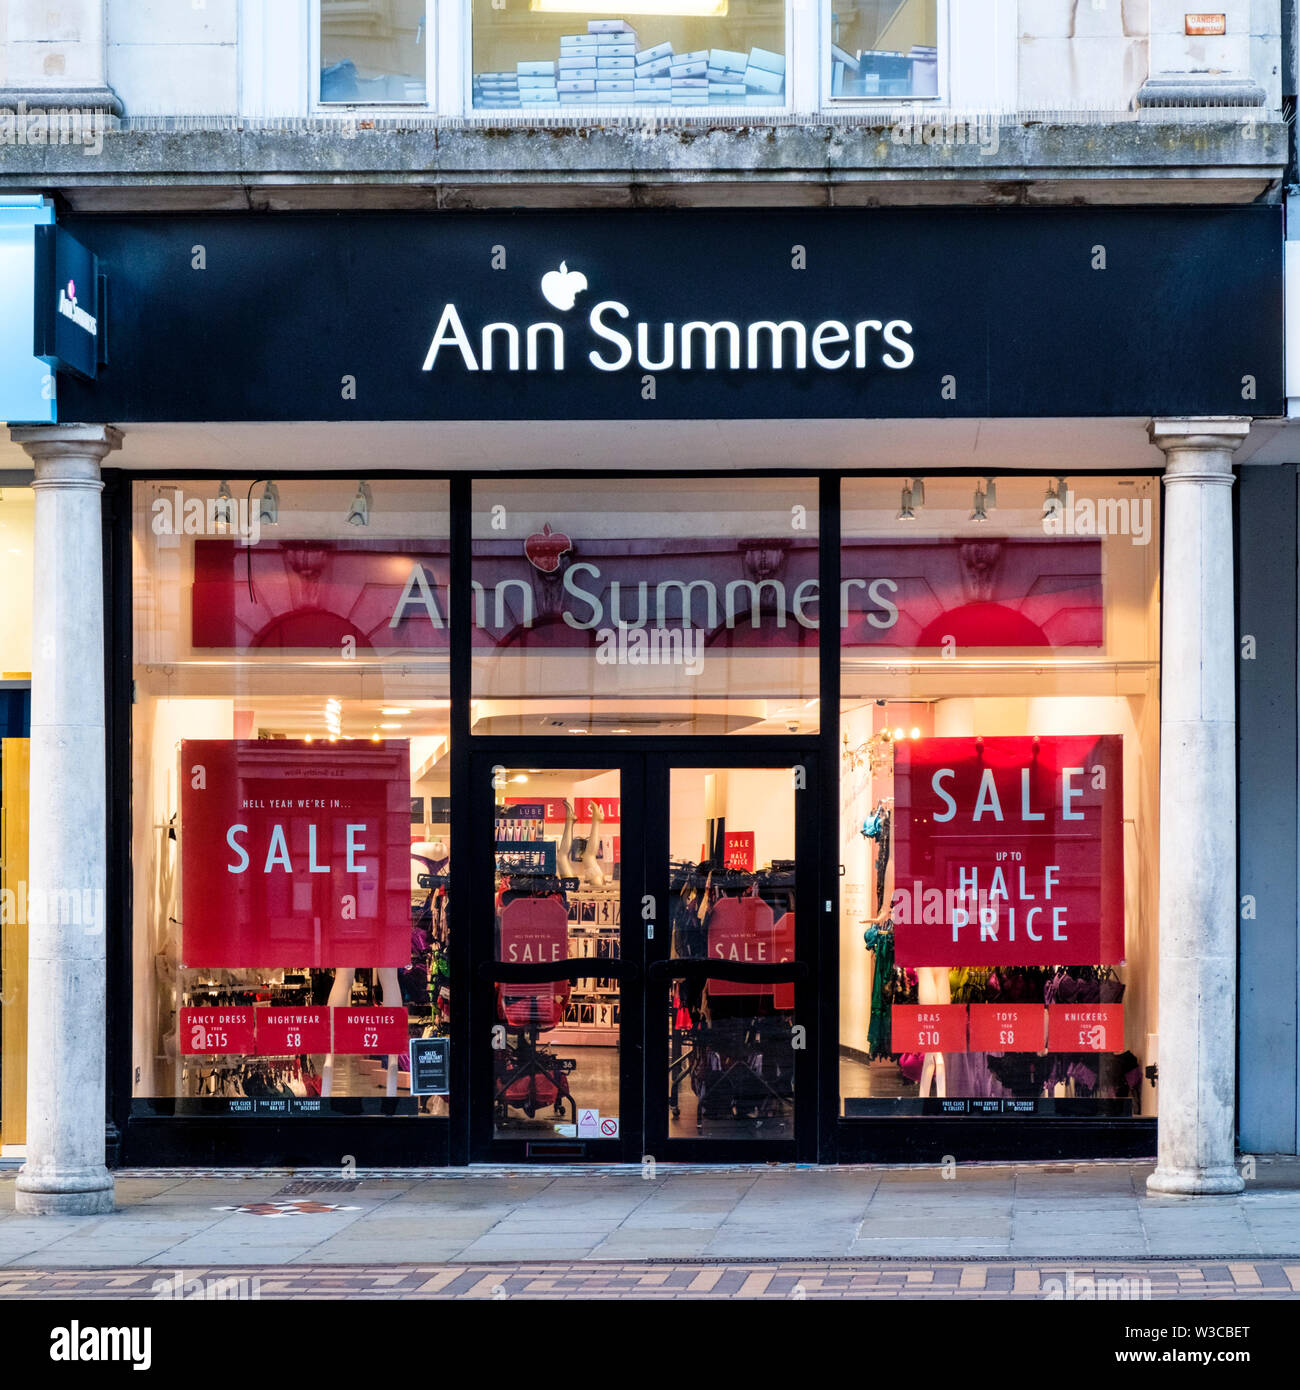 Of Ann Summers High Resolution Stock Photography and Images - Alamy